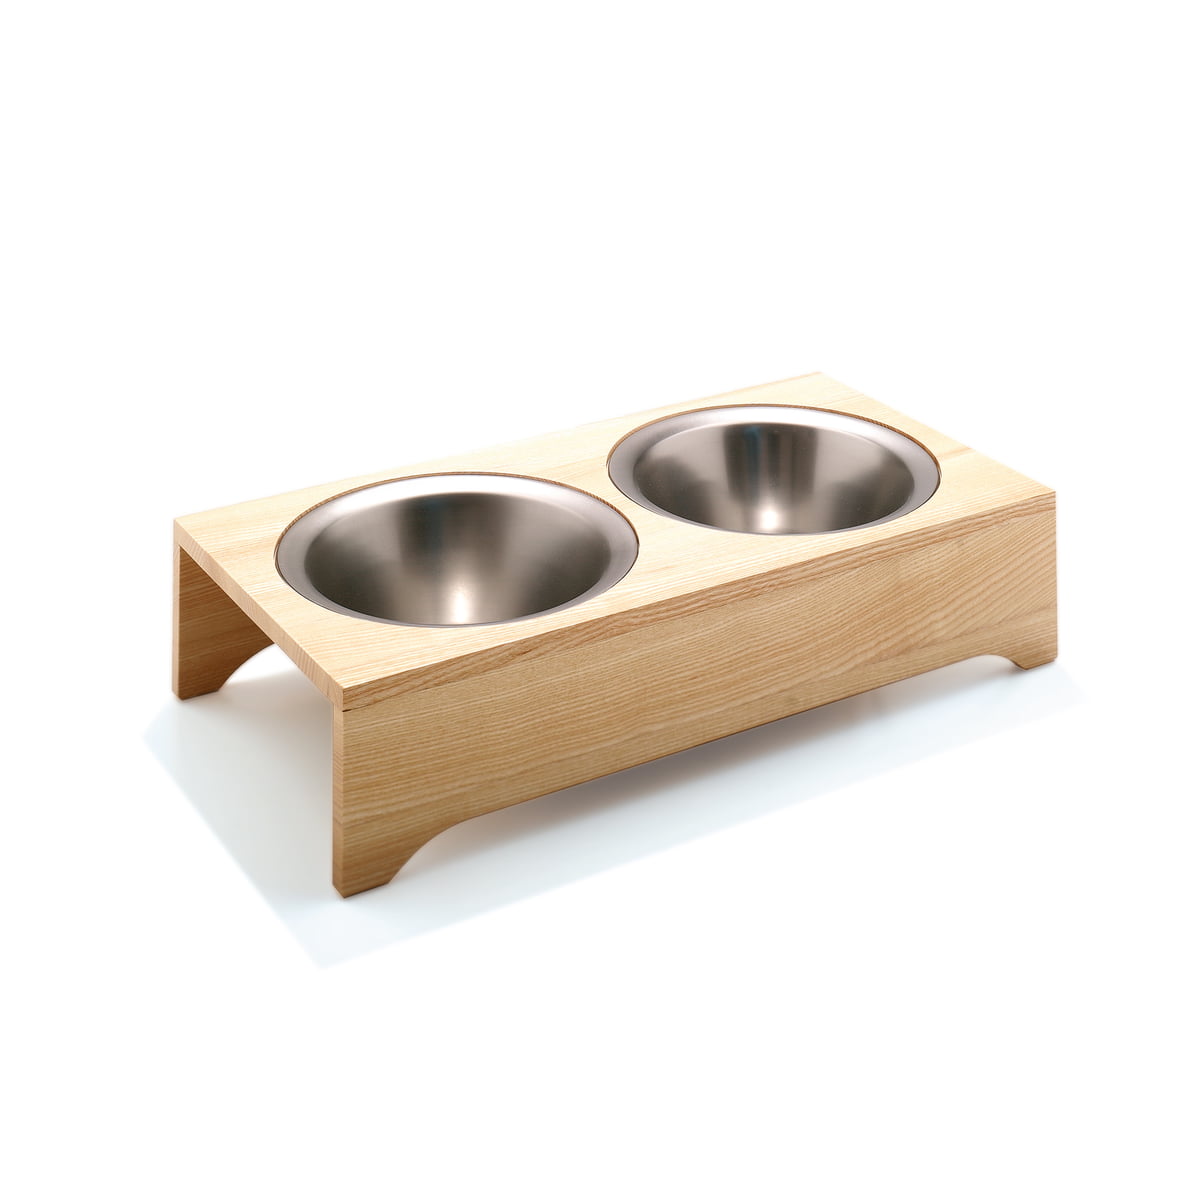 Dog and cat Bowl, side by side